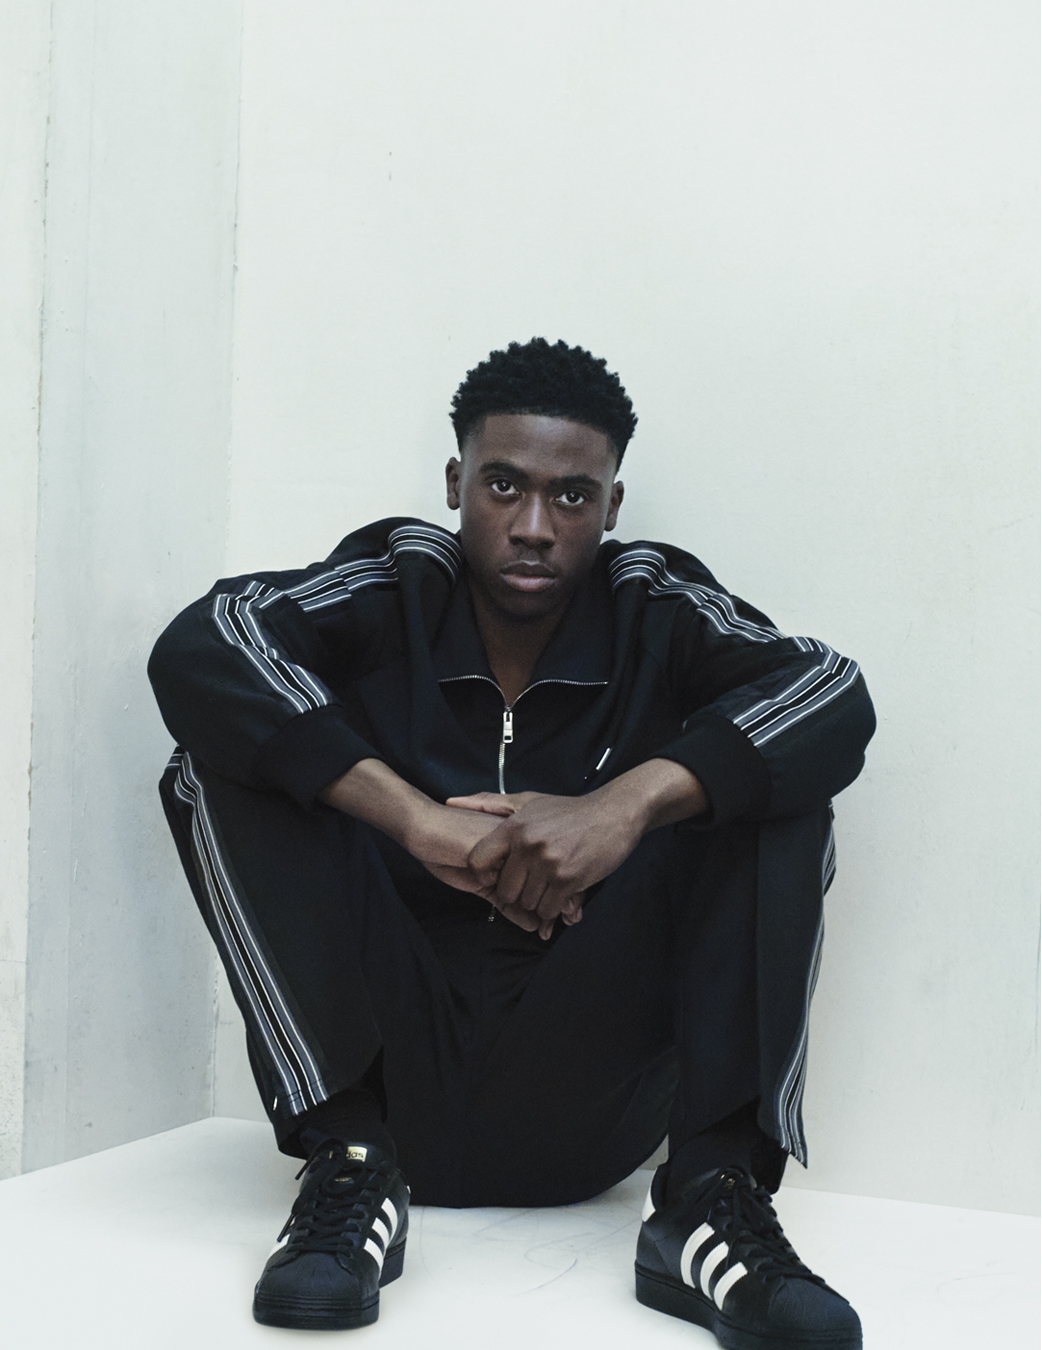 Nino in a tracksuit sat in a concrete white room photographed by Dale Cutts for i-D’s The Royalty Issue, no. 370, Winter 2022